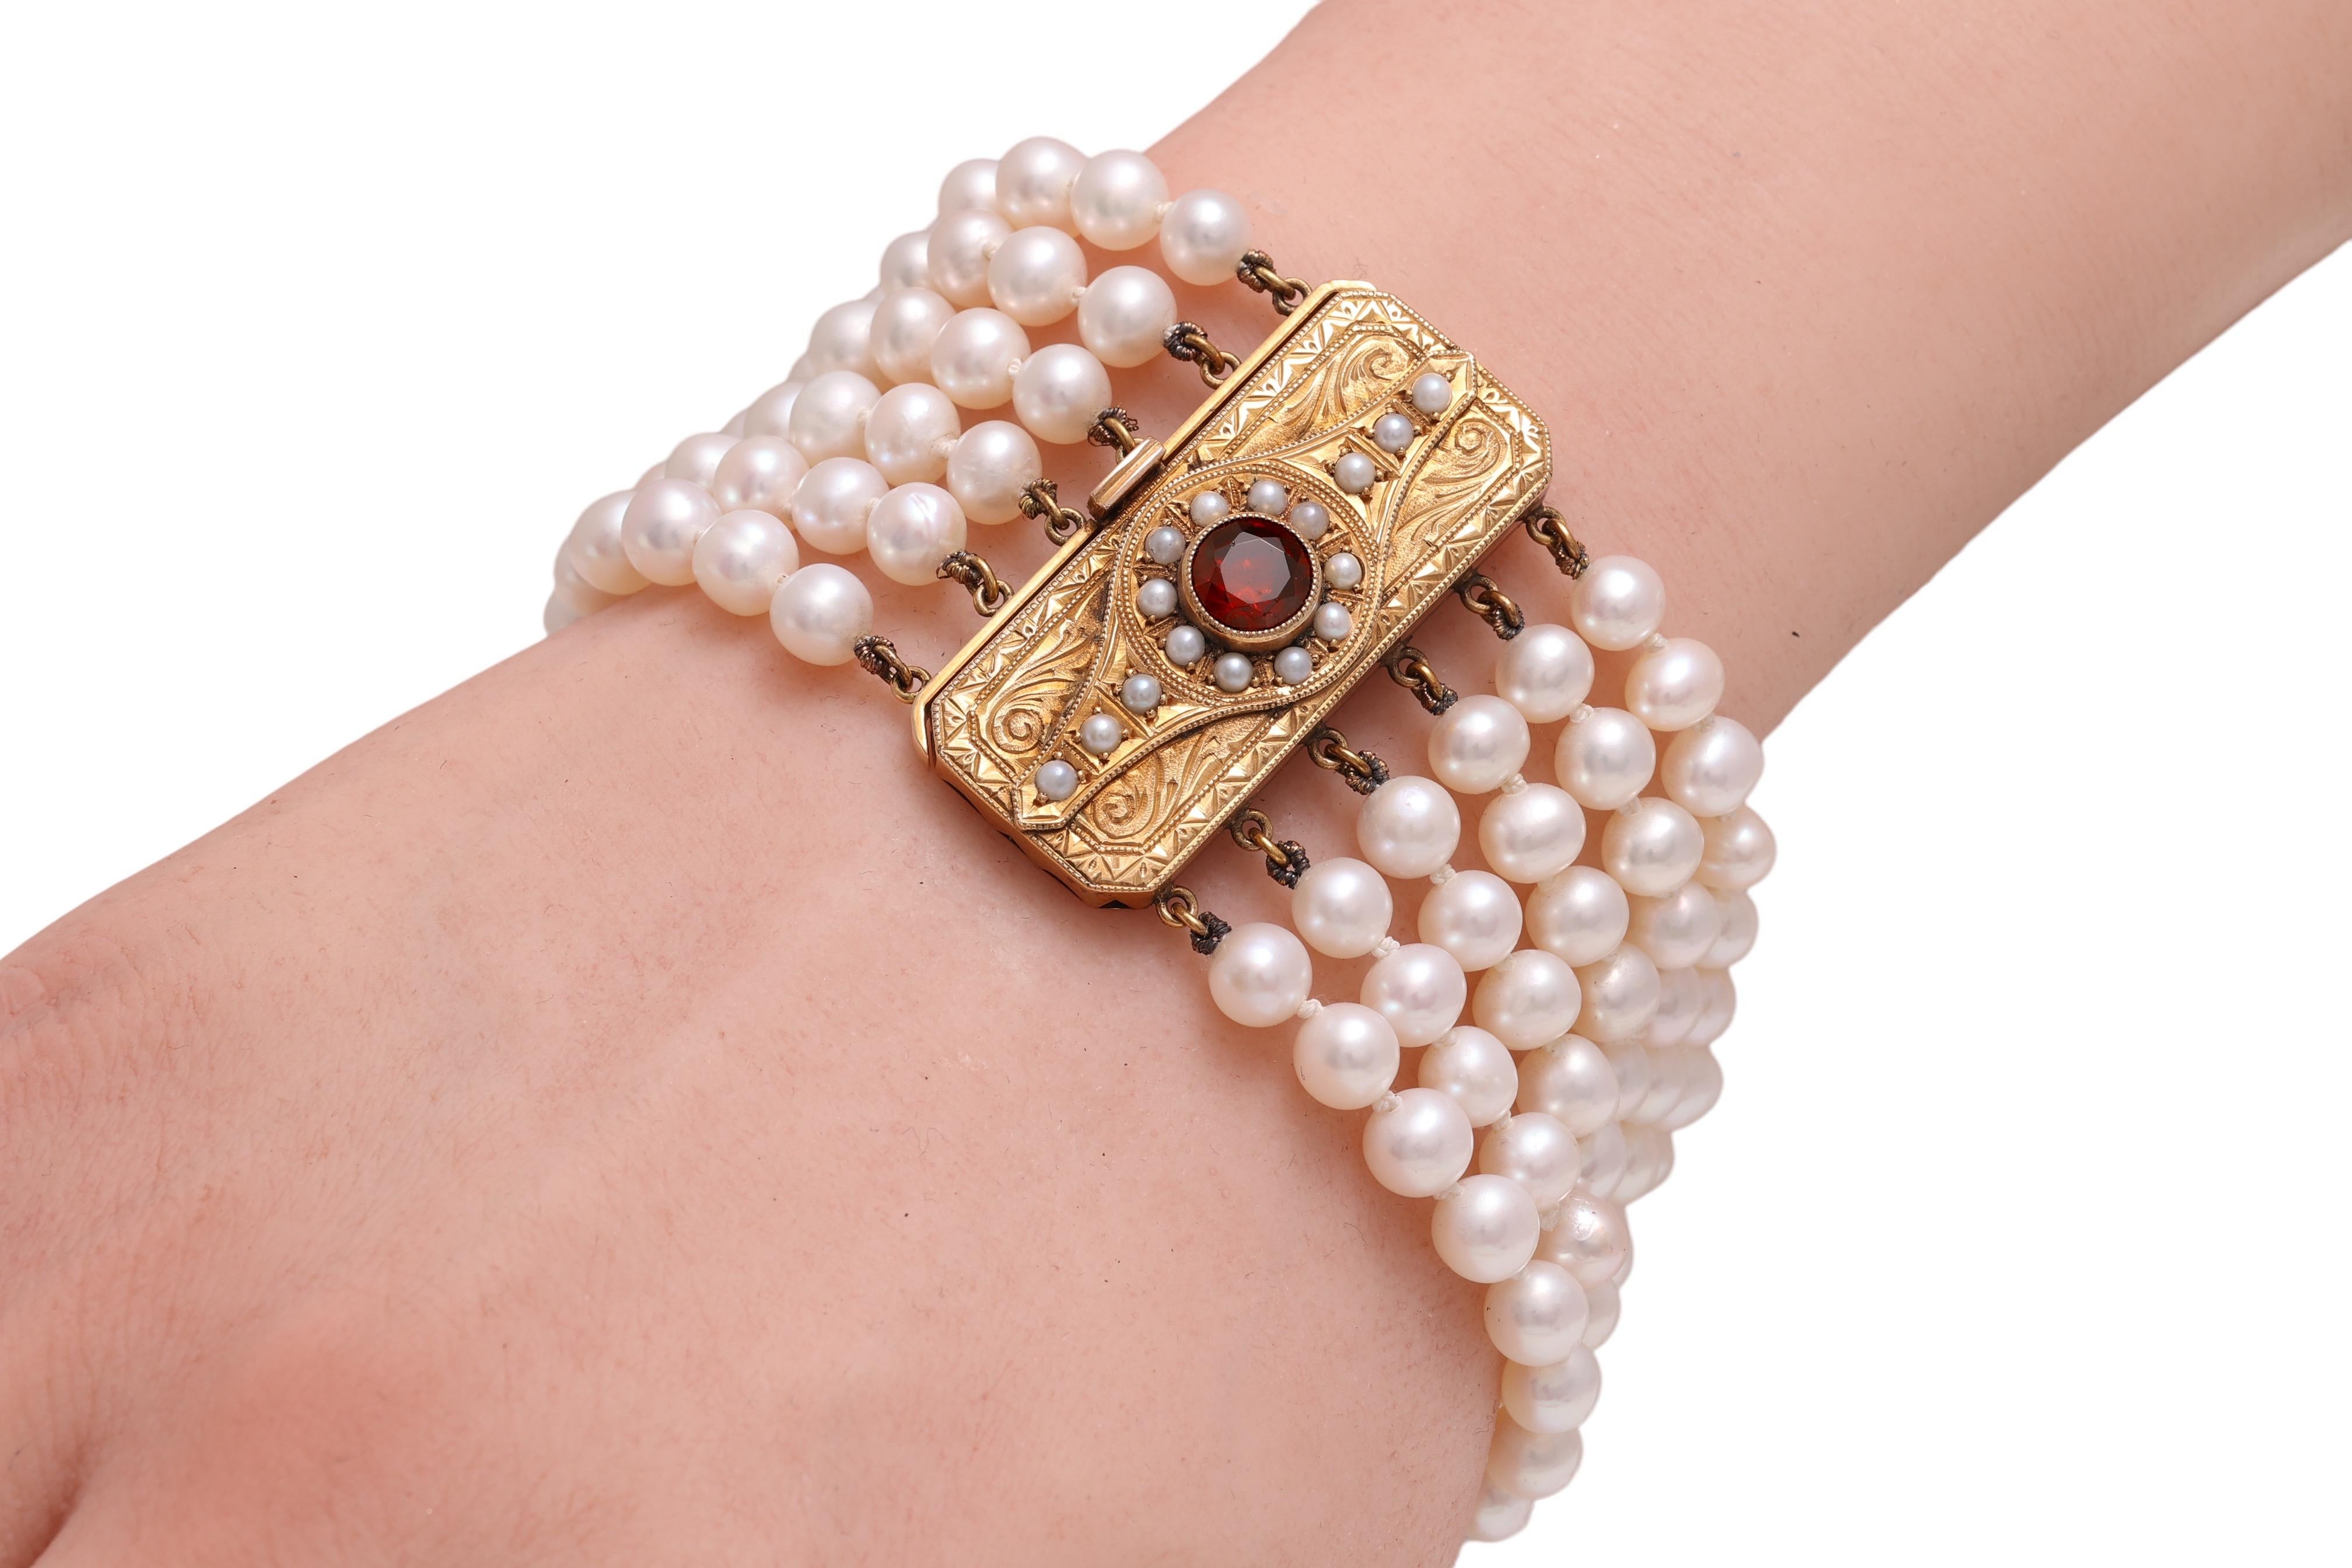 18 Kt Gold Lock, Bracelet with 6 Rows of Akoya Pearls & Art deco  1ct. Garnet  For Sale 1